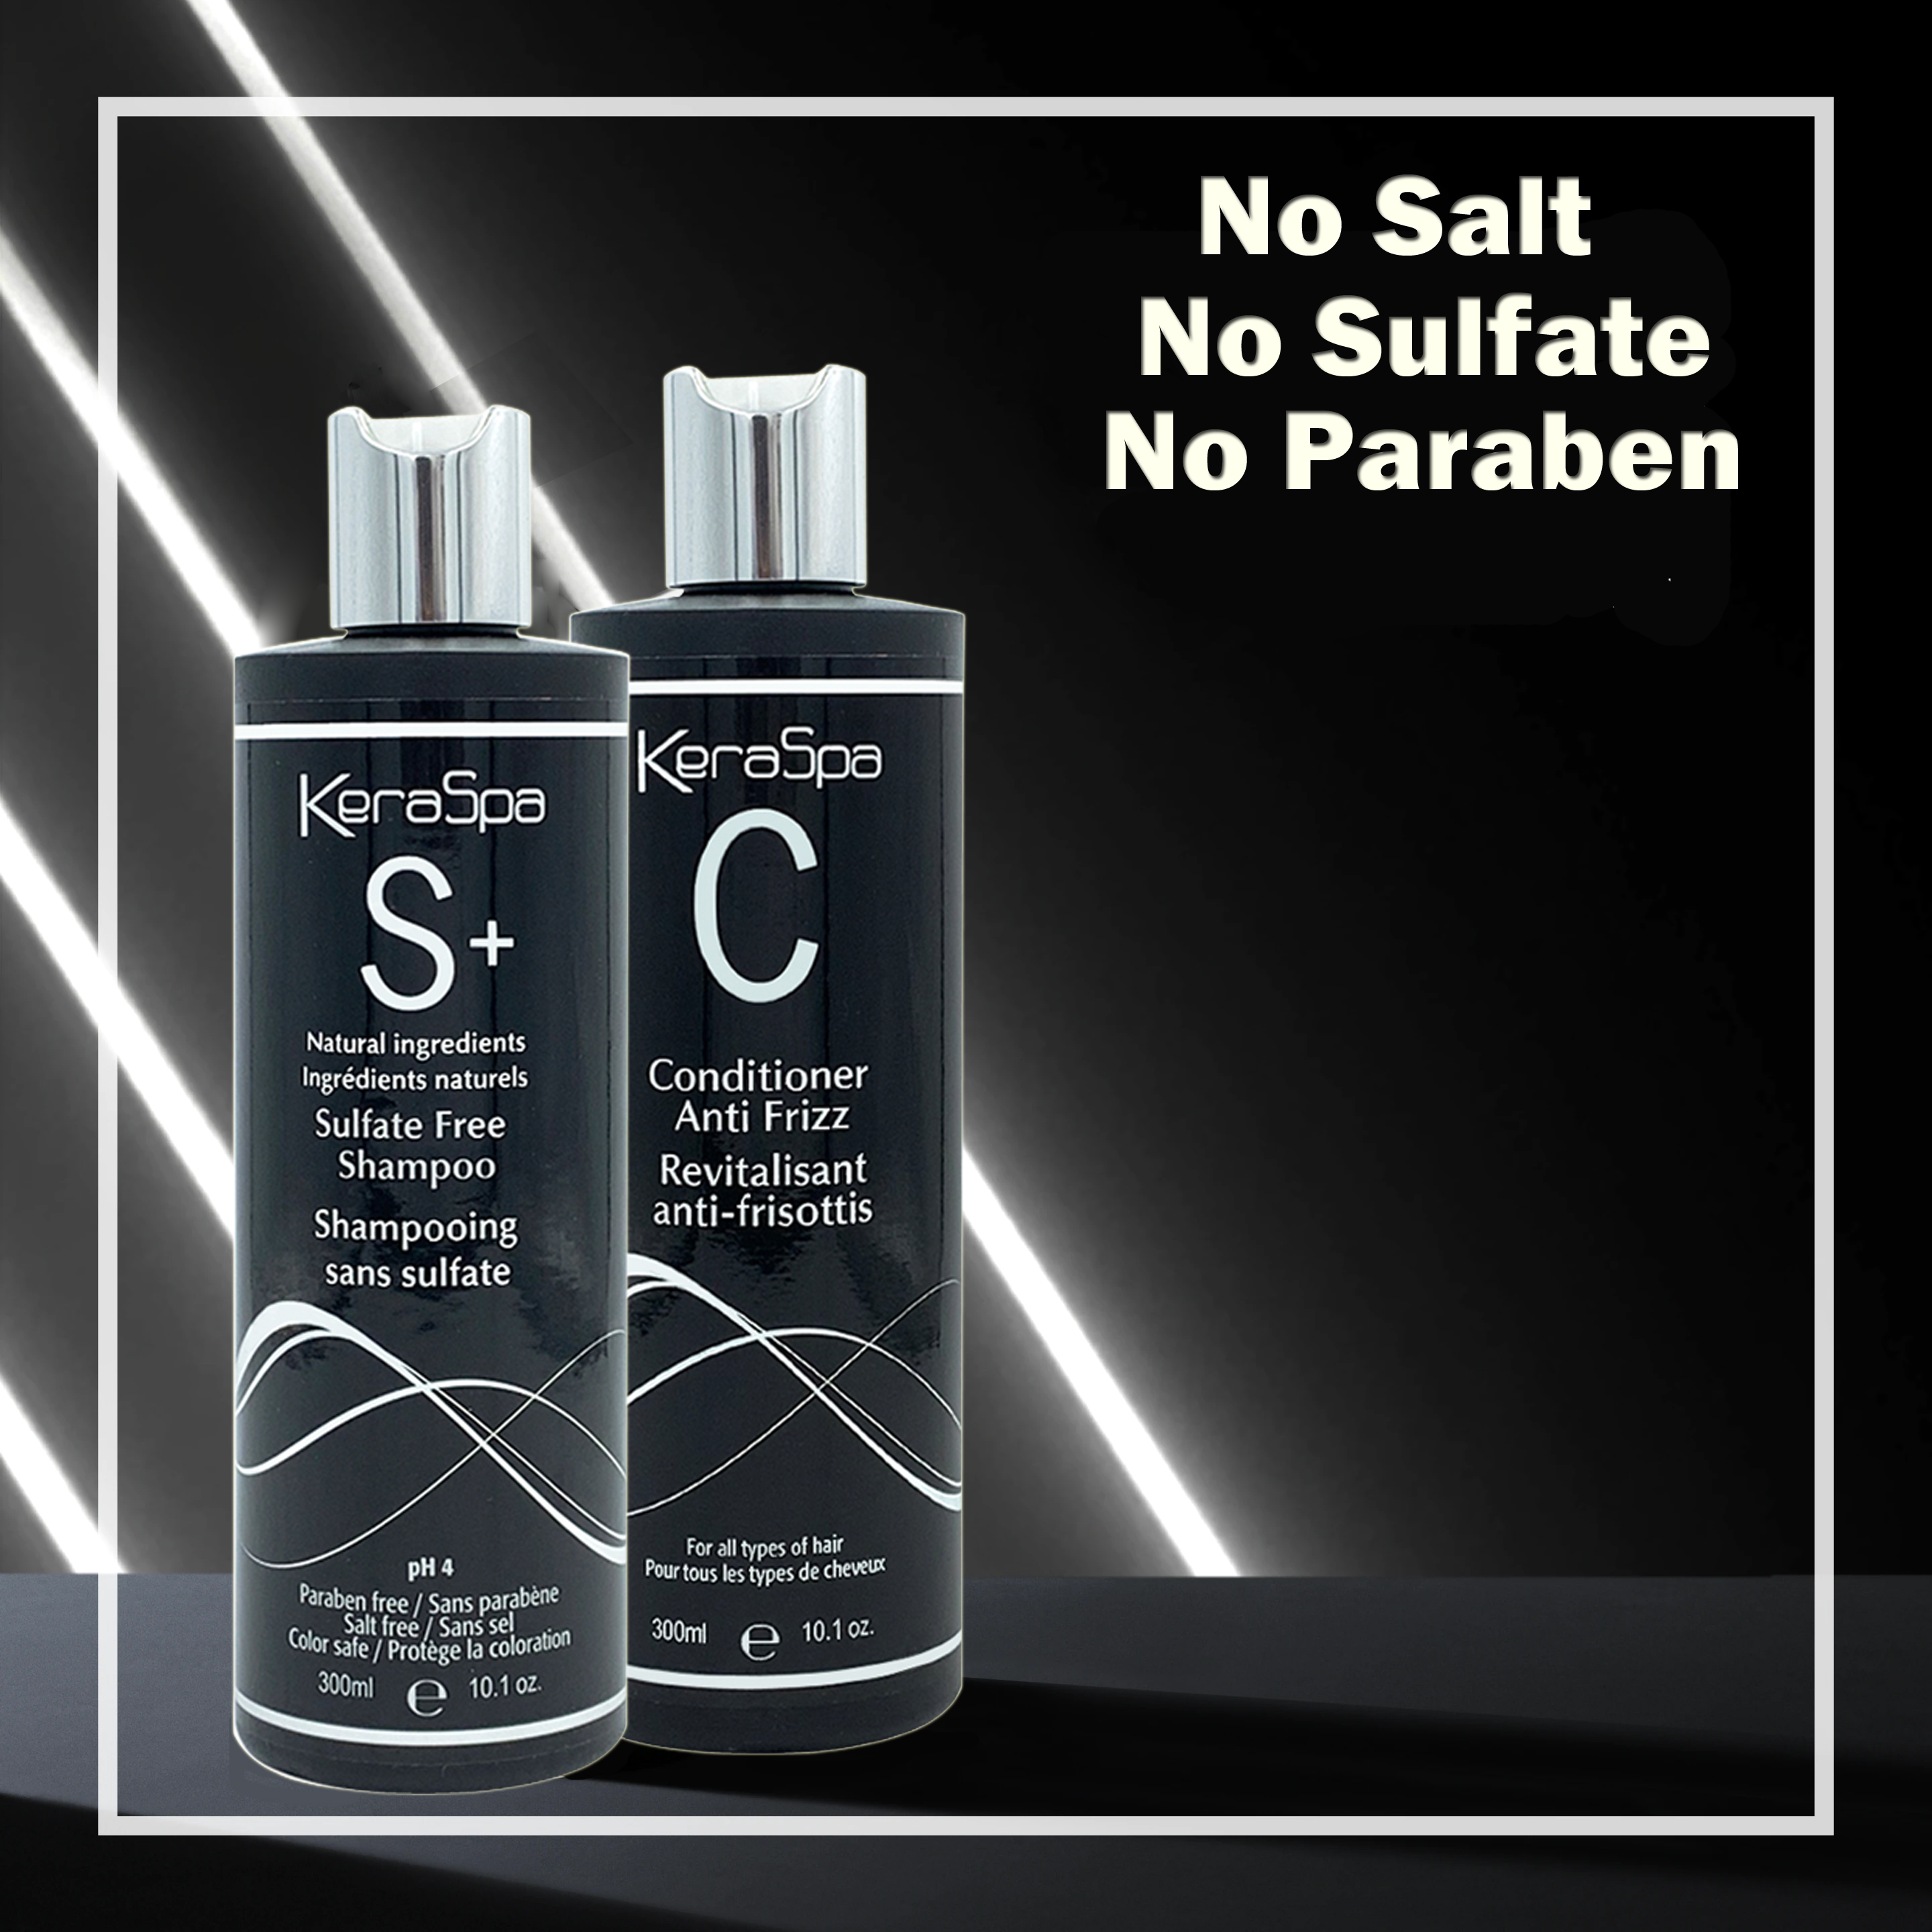 What is sulfate free shampoo?